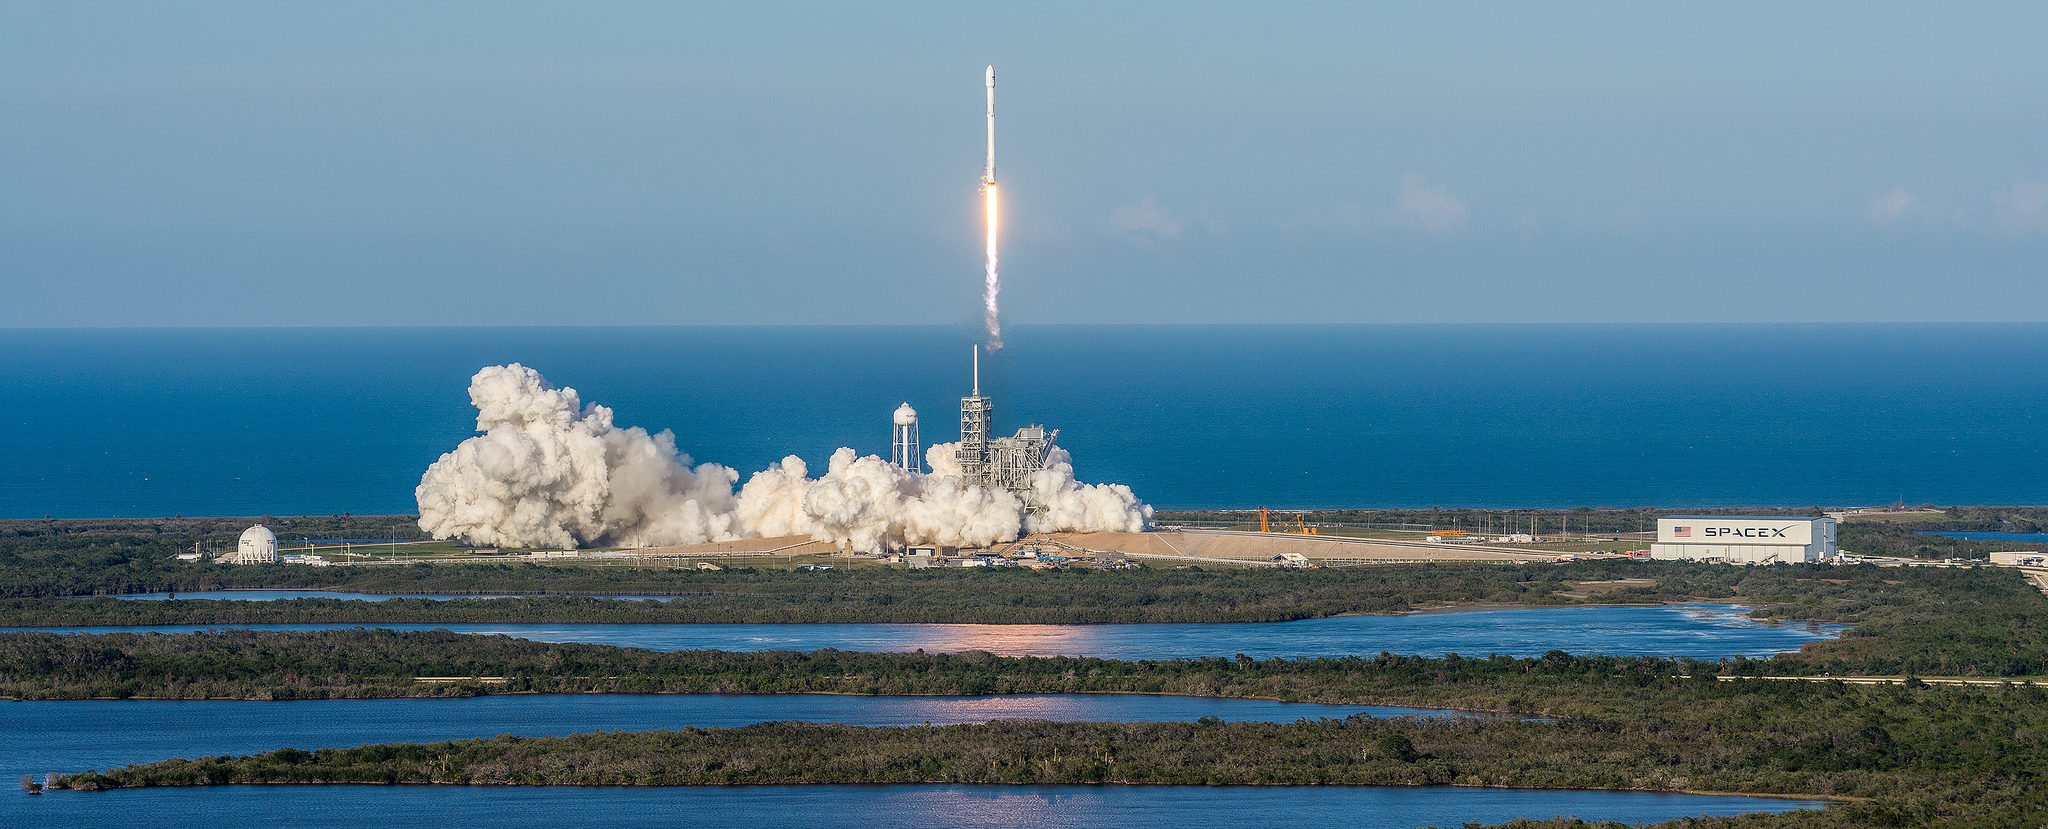 SpaceX relaunches a used rocket making history